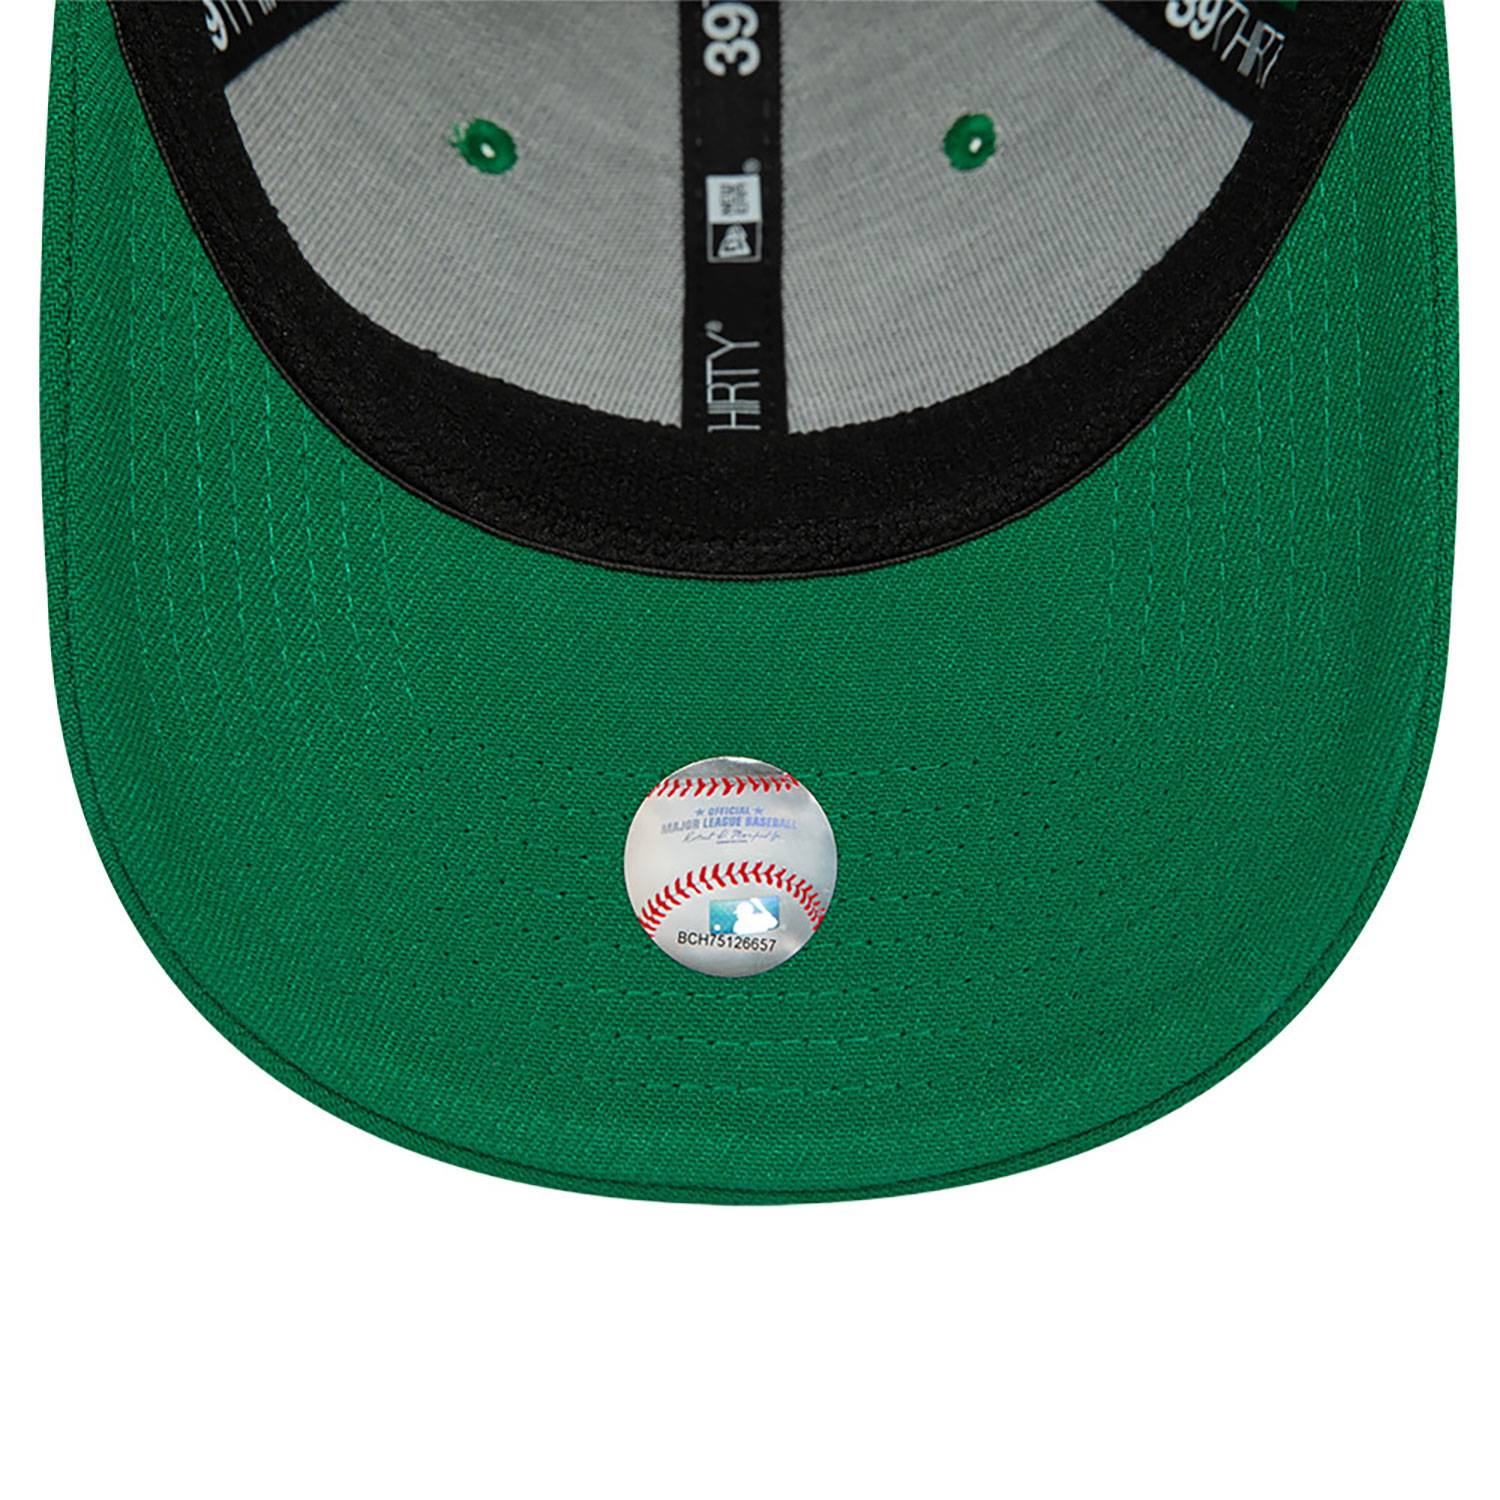 Casquette 39THIRTY Stretch Fit Oakland Athletics Team Motif